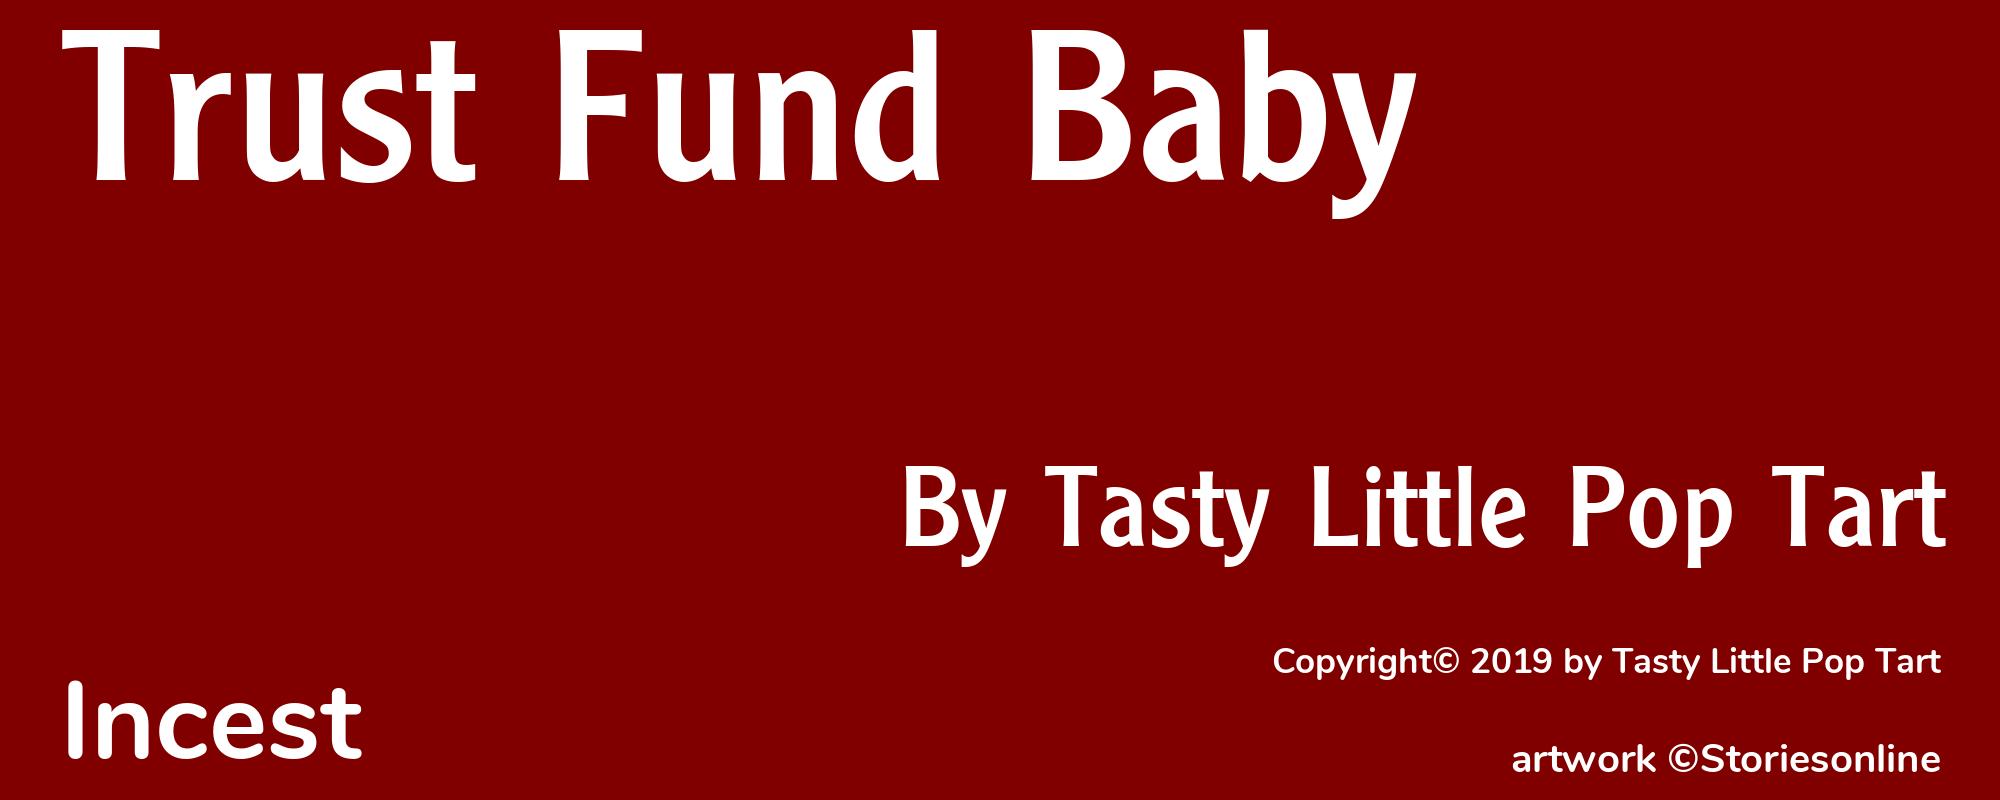 Trust Fund Baby - Cover